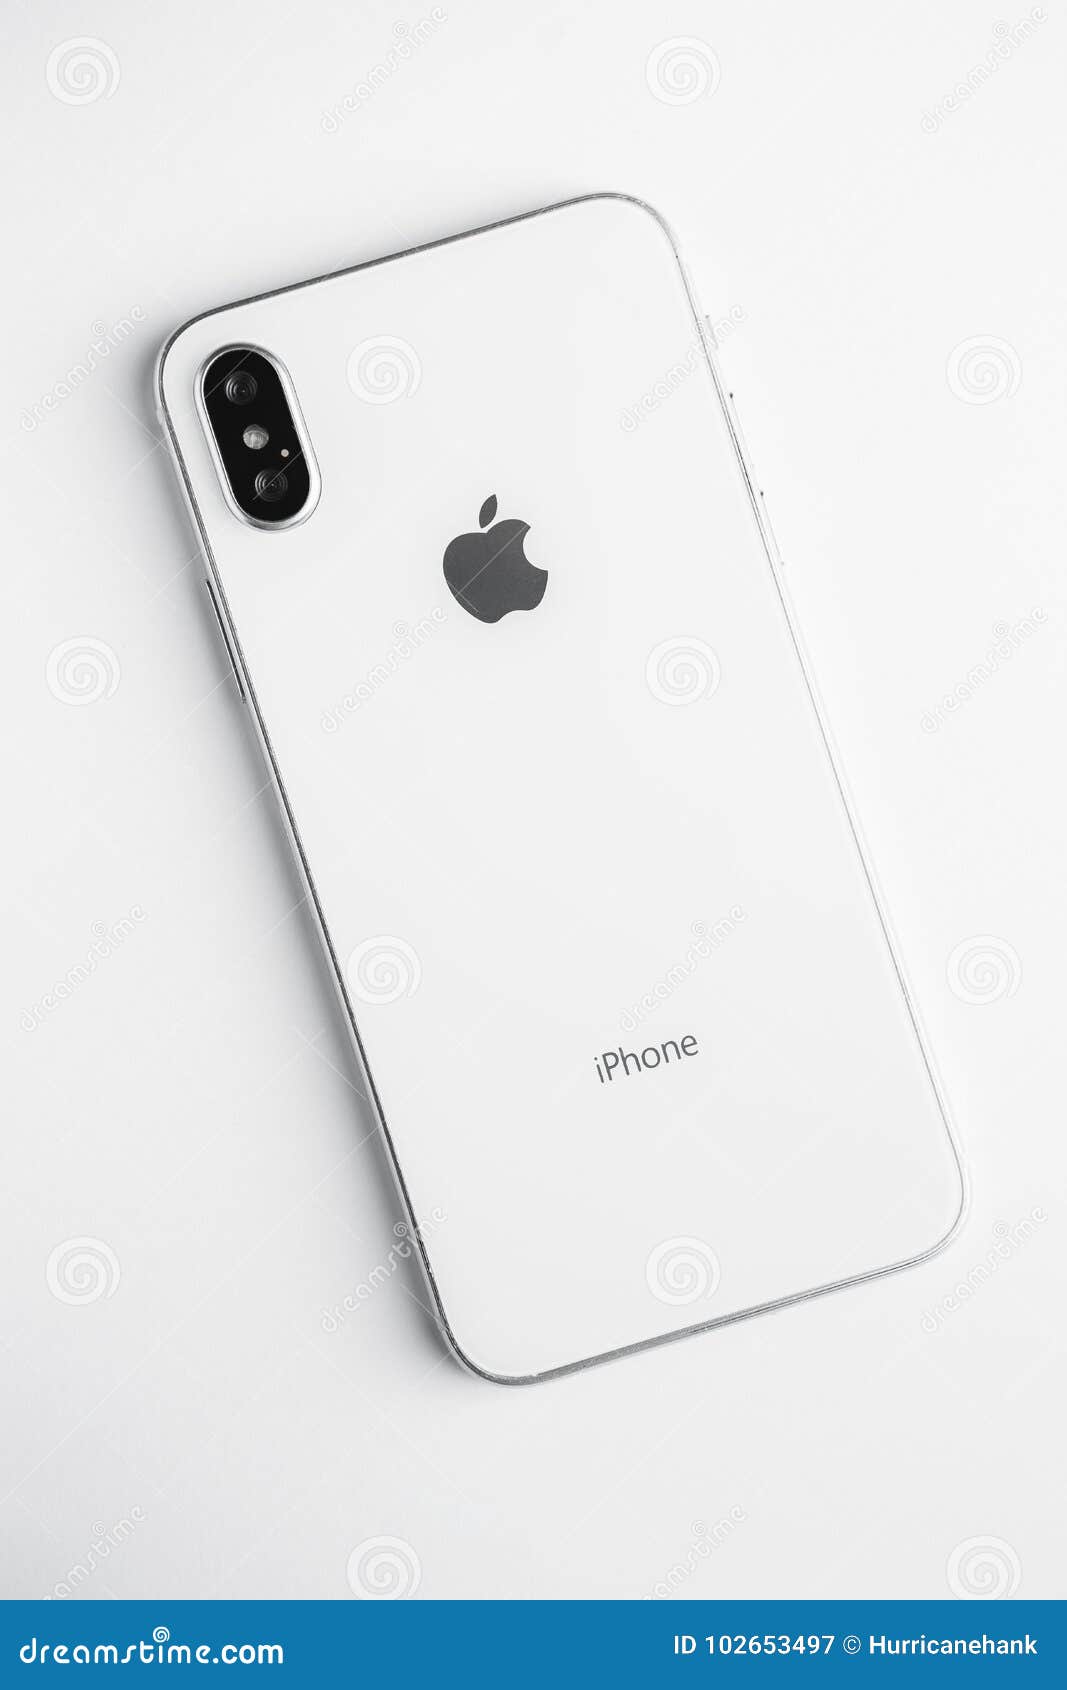 New White IPhone X.Latest Model of Apple Iphone 10 Editorial